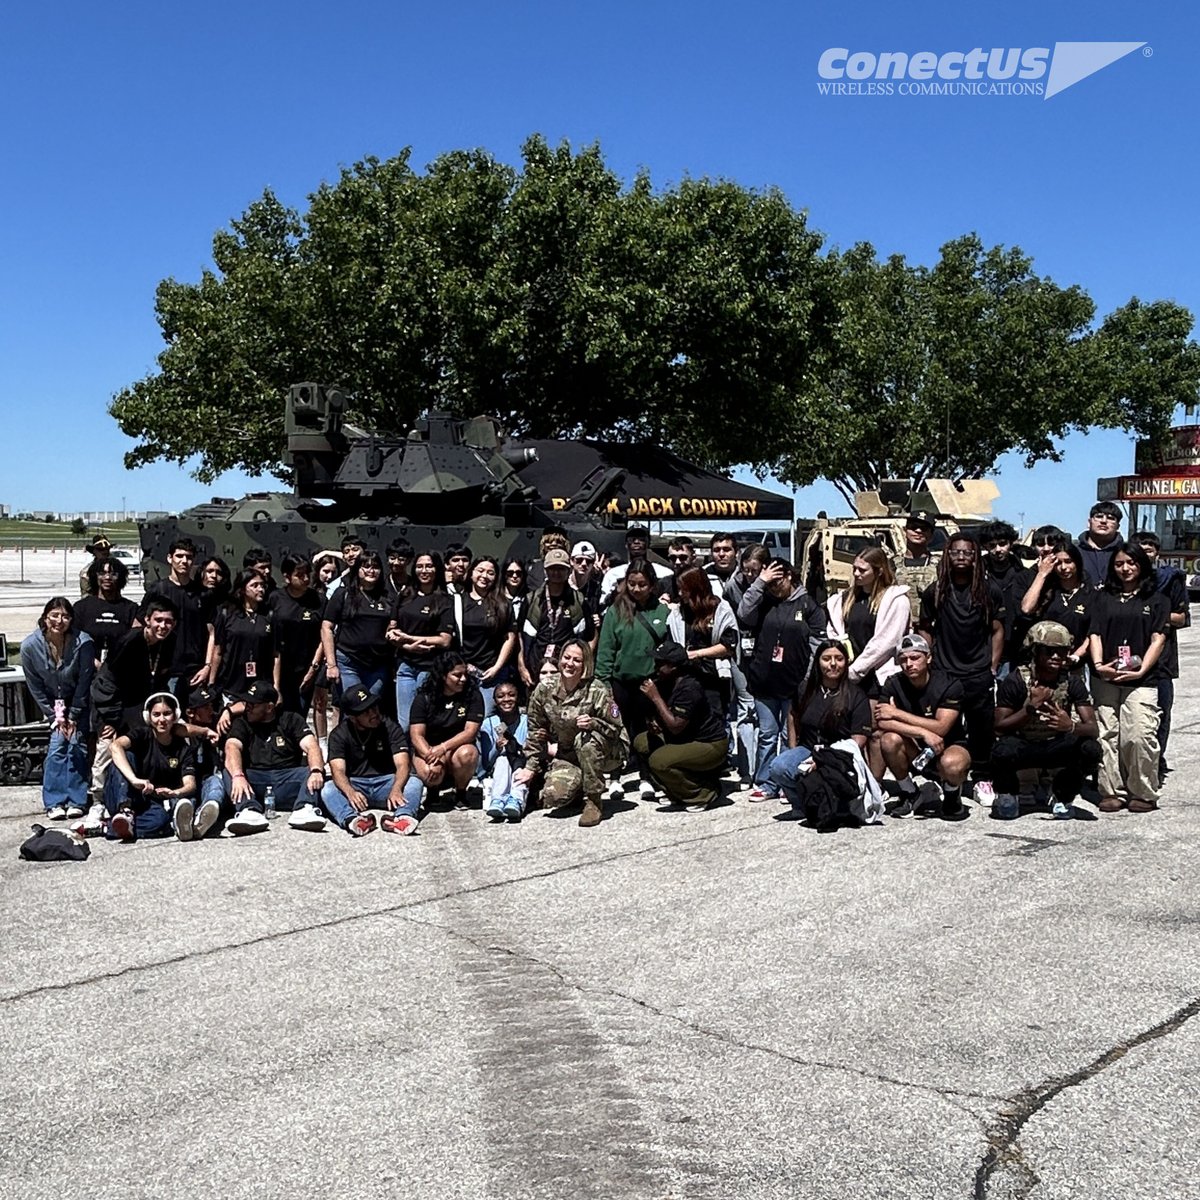 On Thursday of last week, ConectUS Wireless partnered with the Team Texas Racing School and Fort Cavazos during their recruiting day! High schoolers from across DFW came out to this event to learn more about joining the U.S. Army, the racing industry, and the wireless industry.